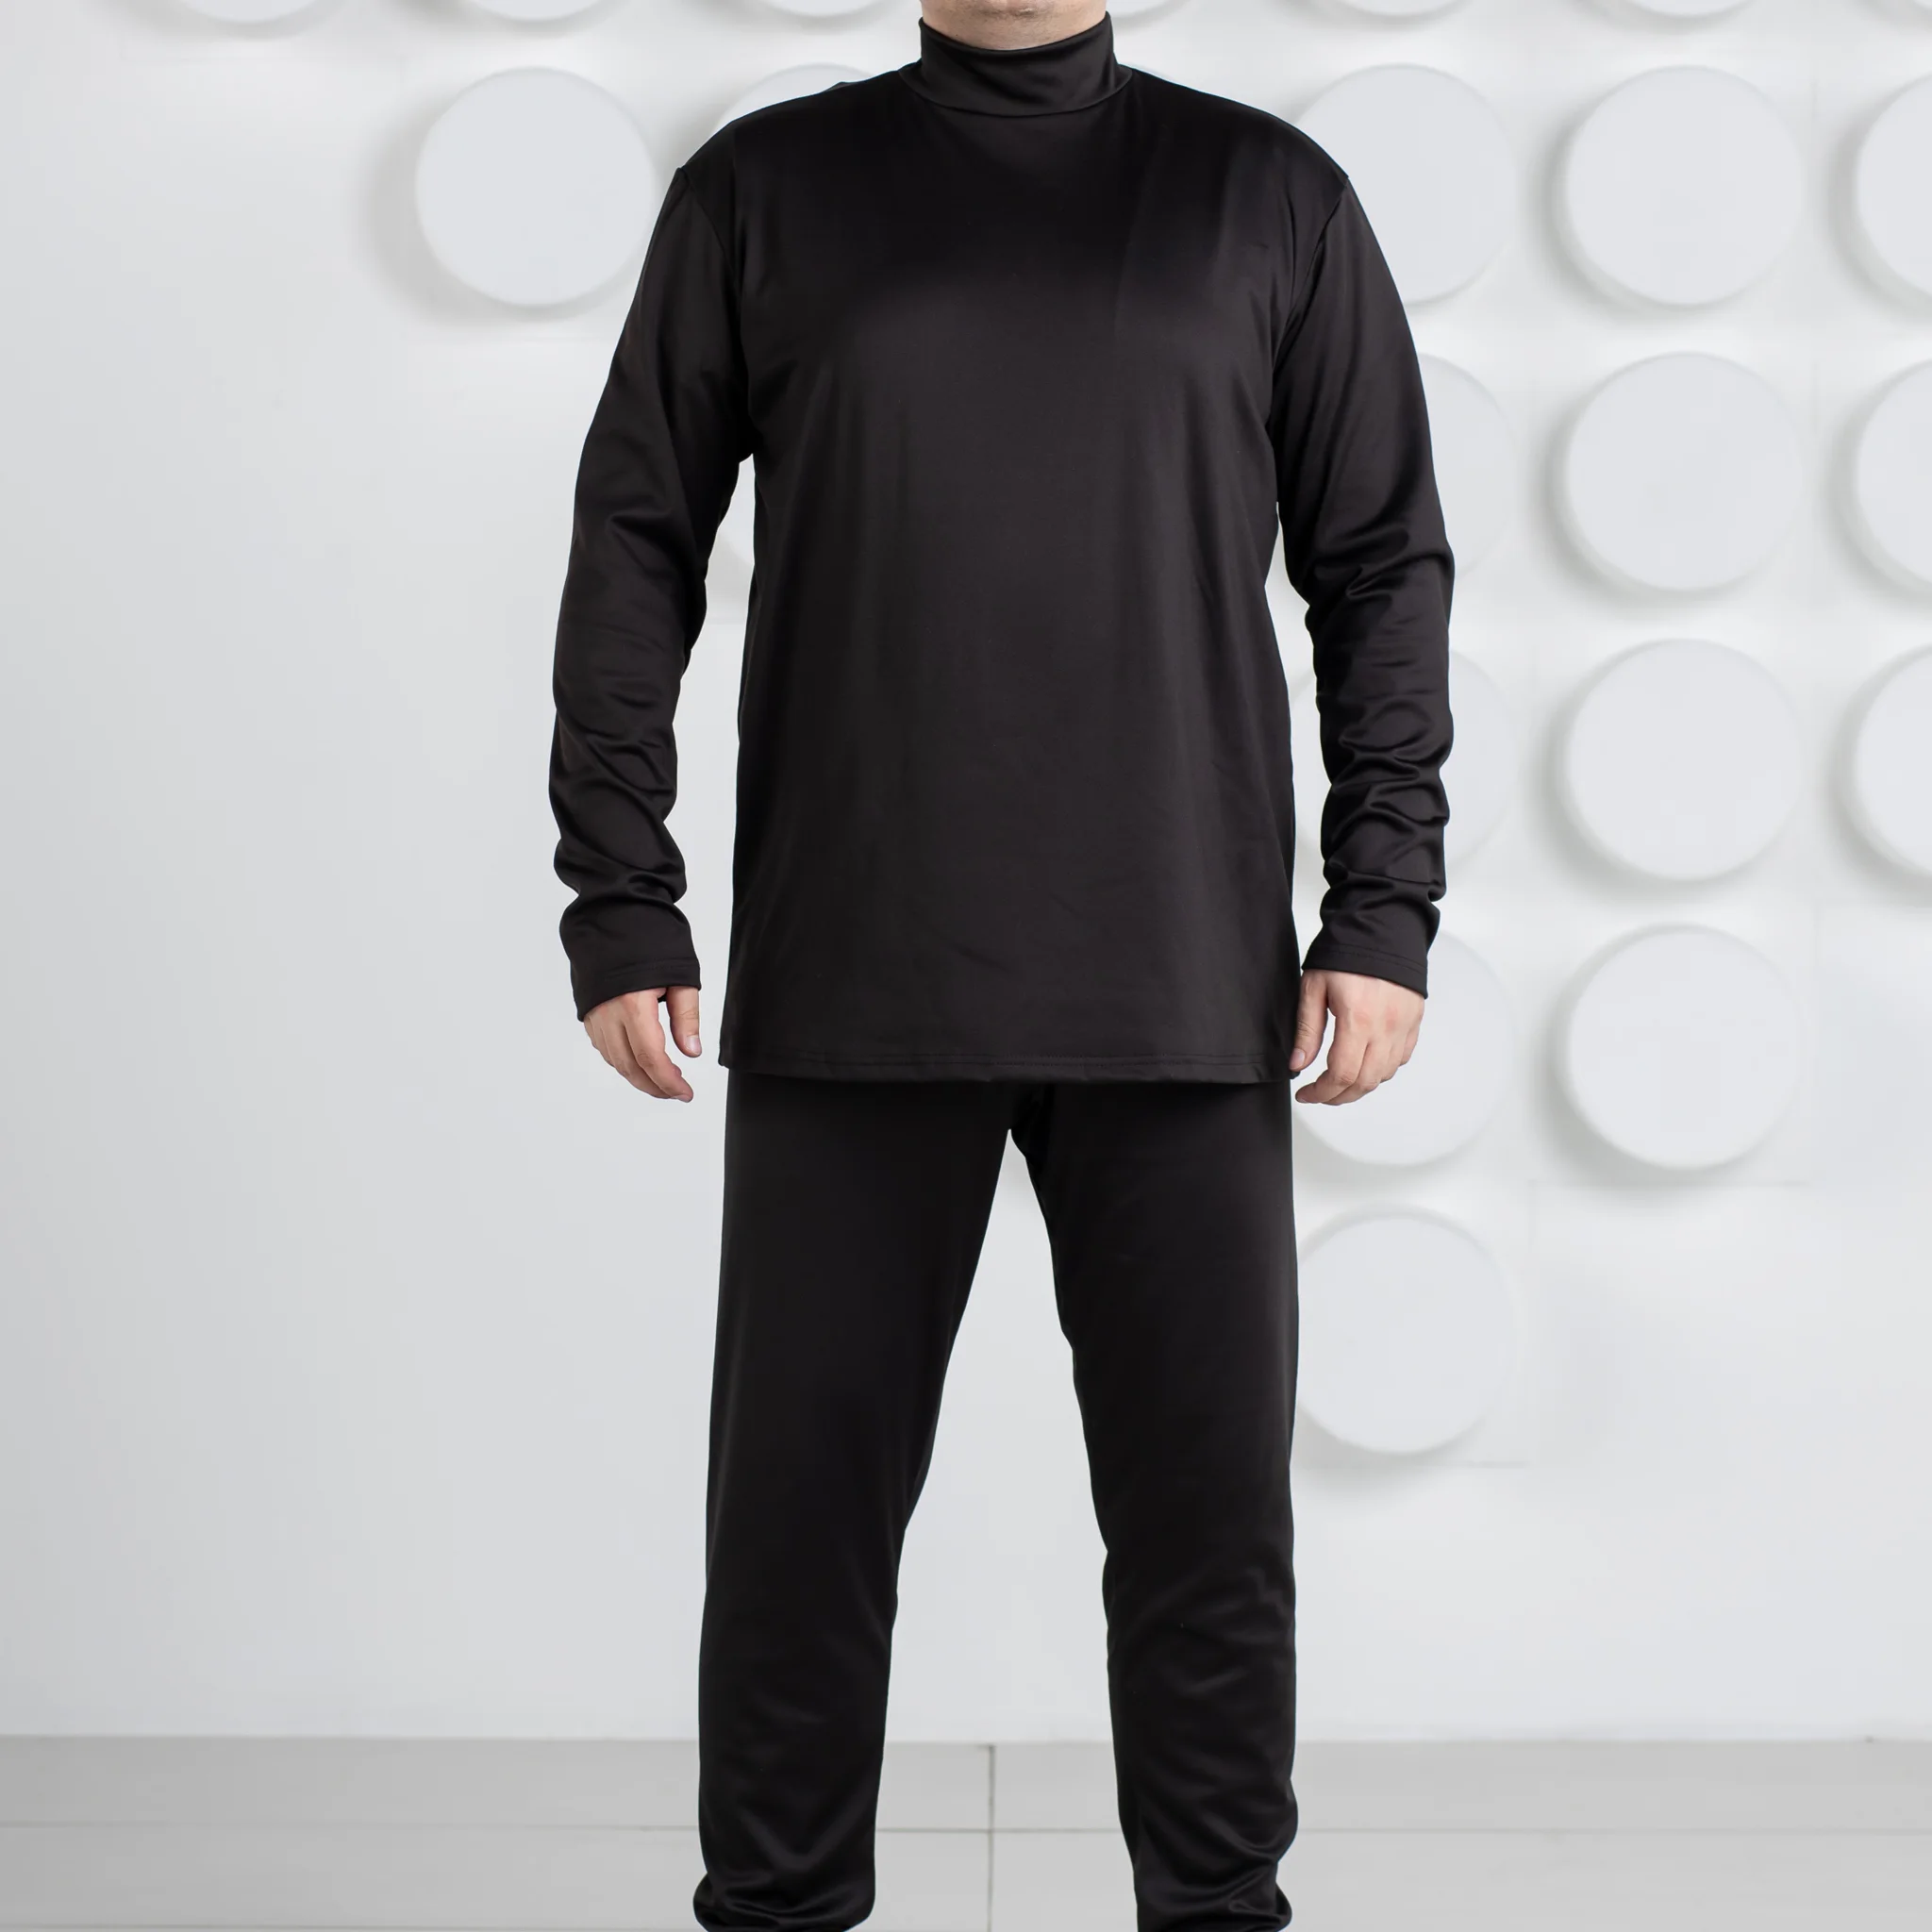 A set of adaptive thermal underwear